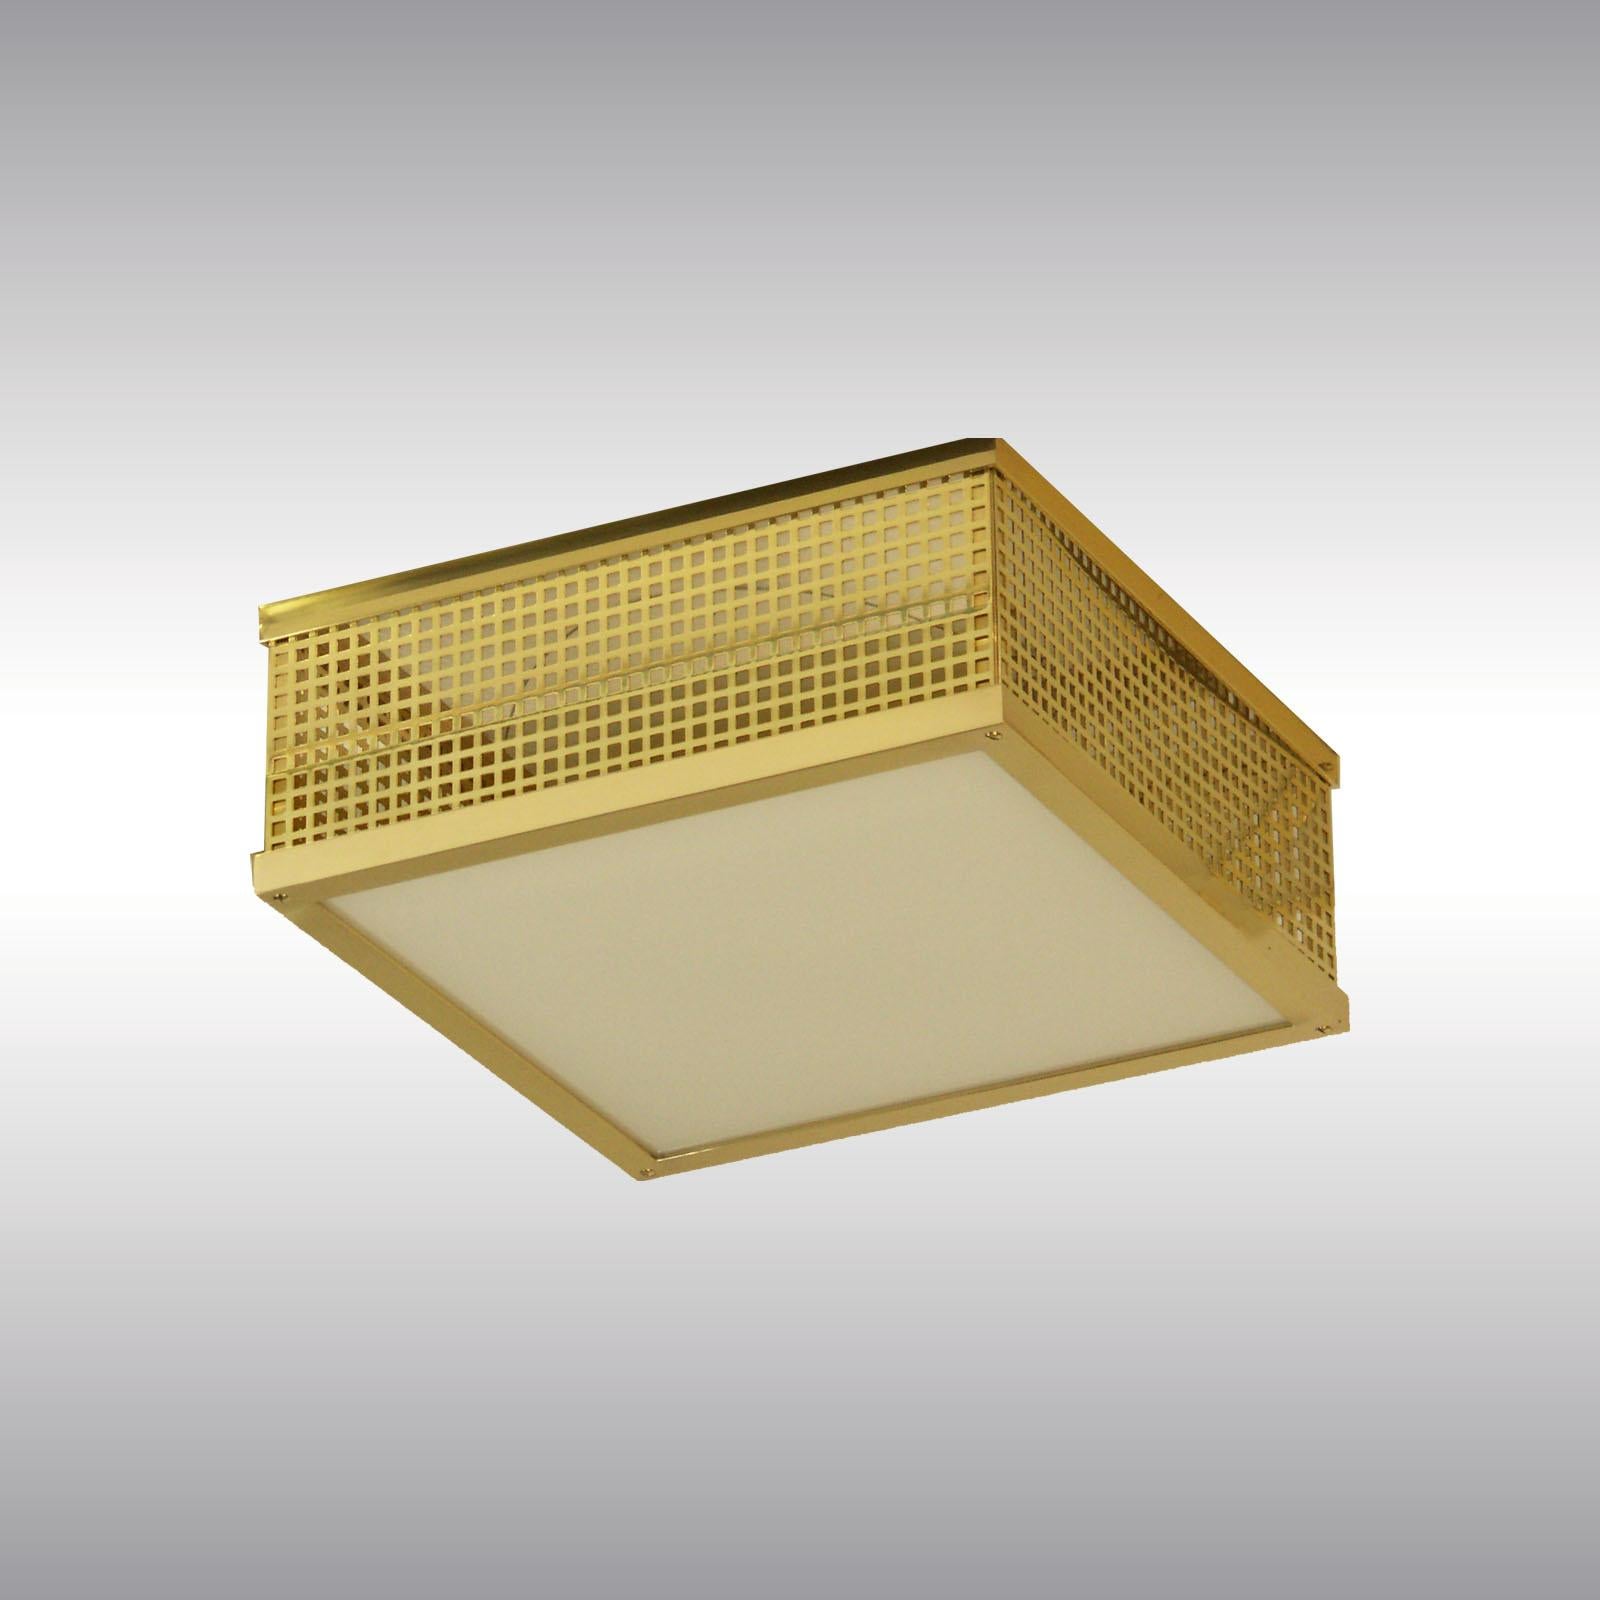 Square ceiling or wall fixture with punched brass-sheet in the requested finish.

All components according to the UL regulations, with an additional charge we will UL-list and label our fixtures.